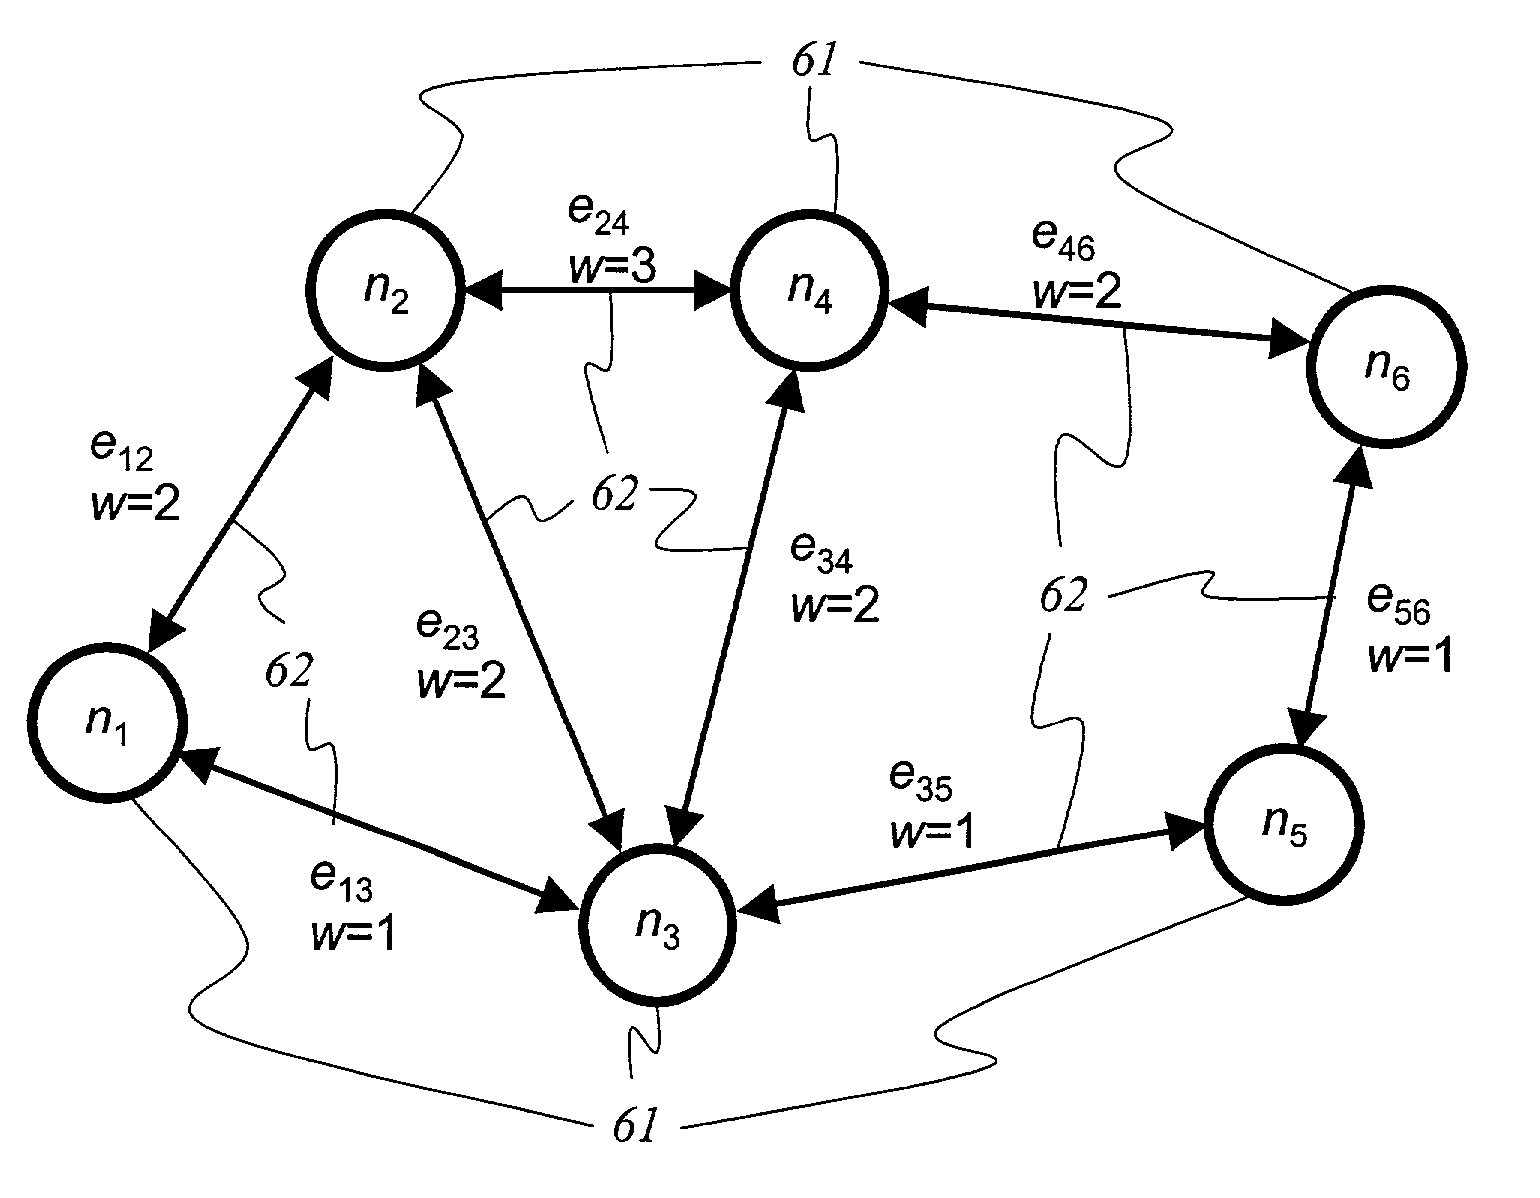 Method and system for fast computation of routes under multiple network states with communication continuation